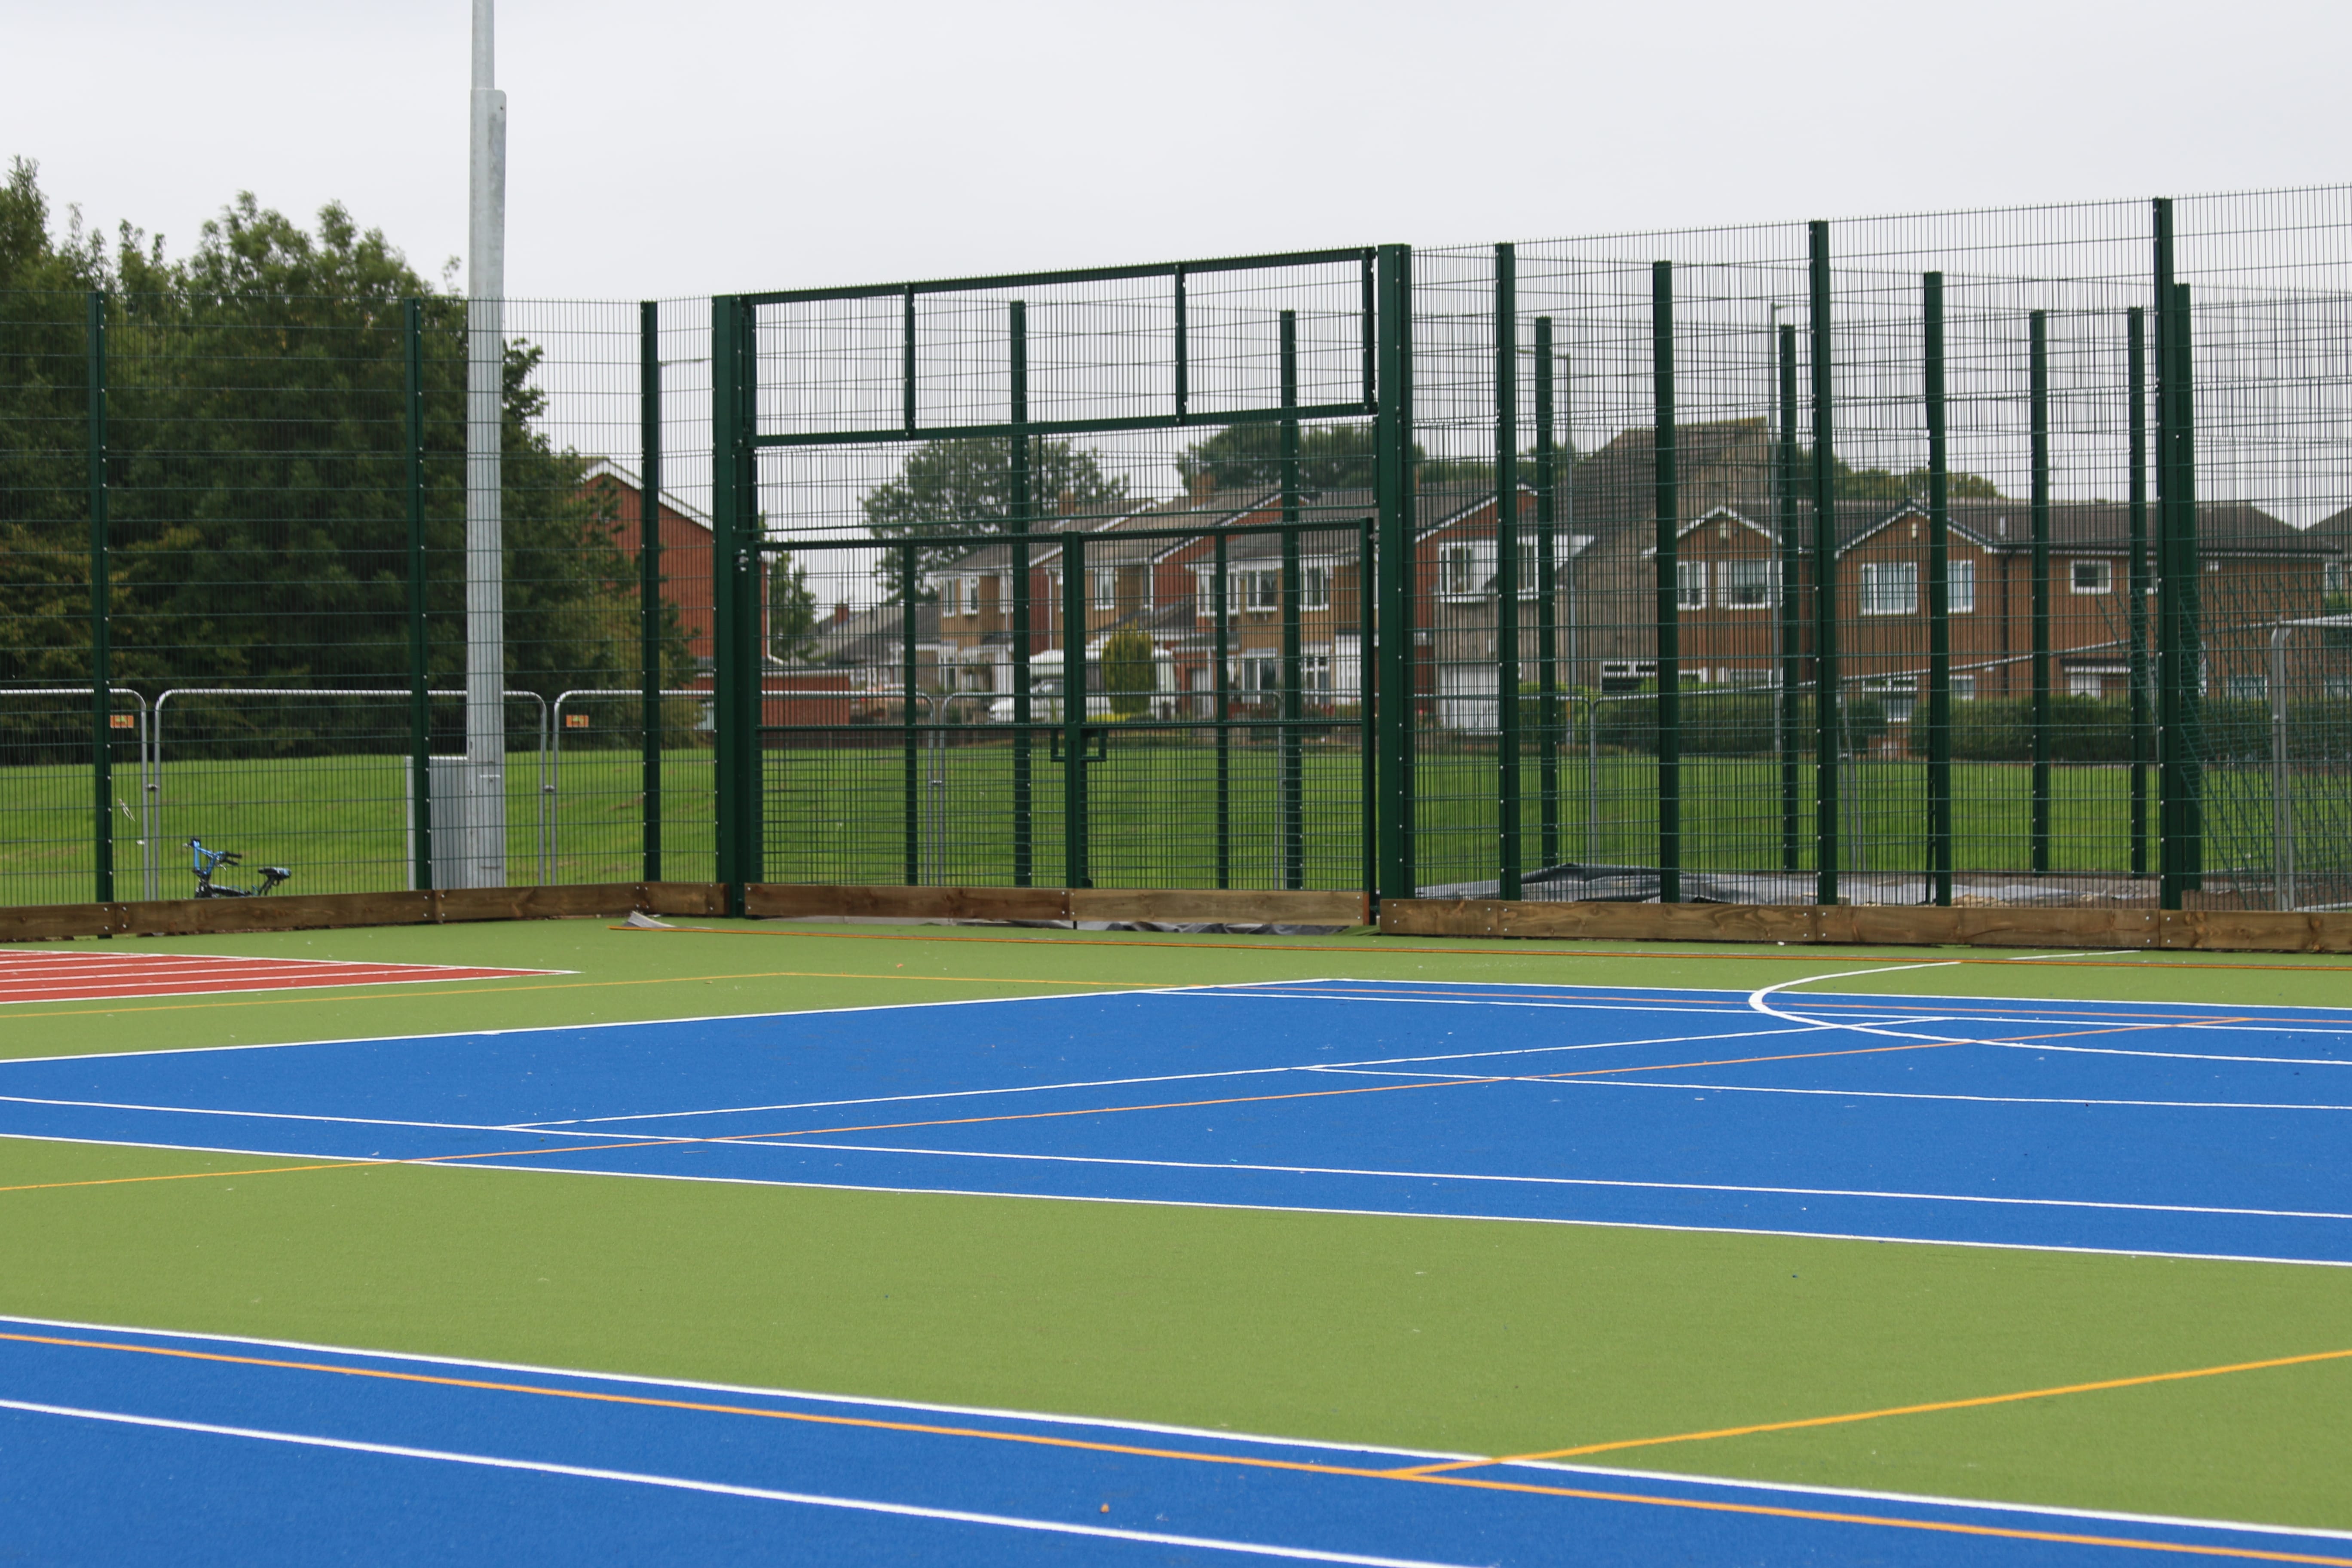 new metal fencing and floodlights